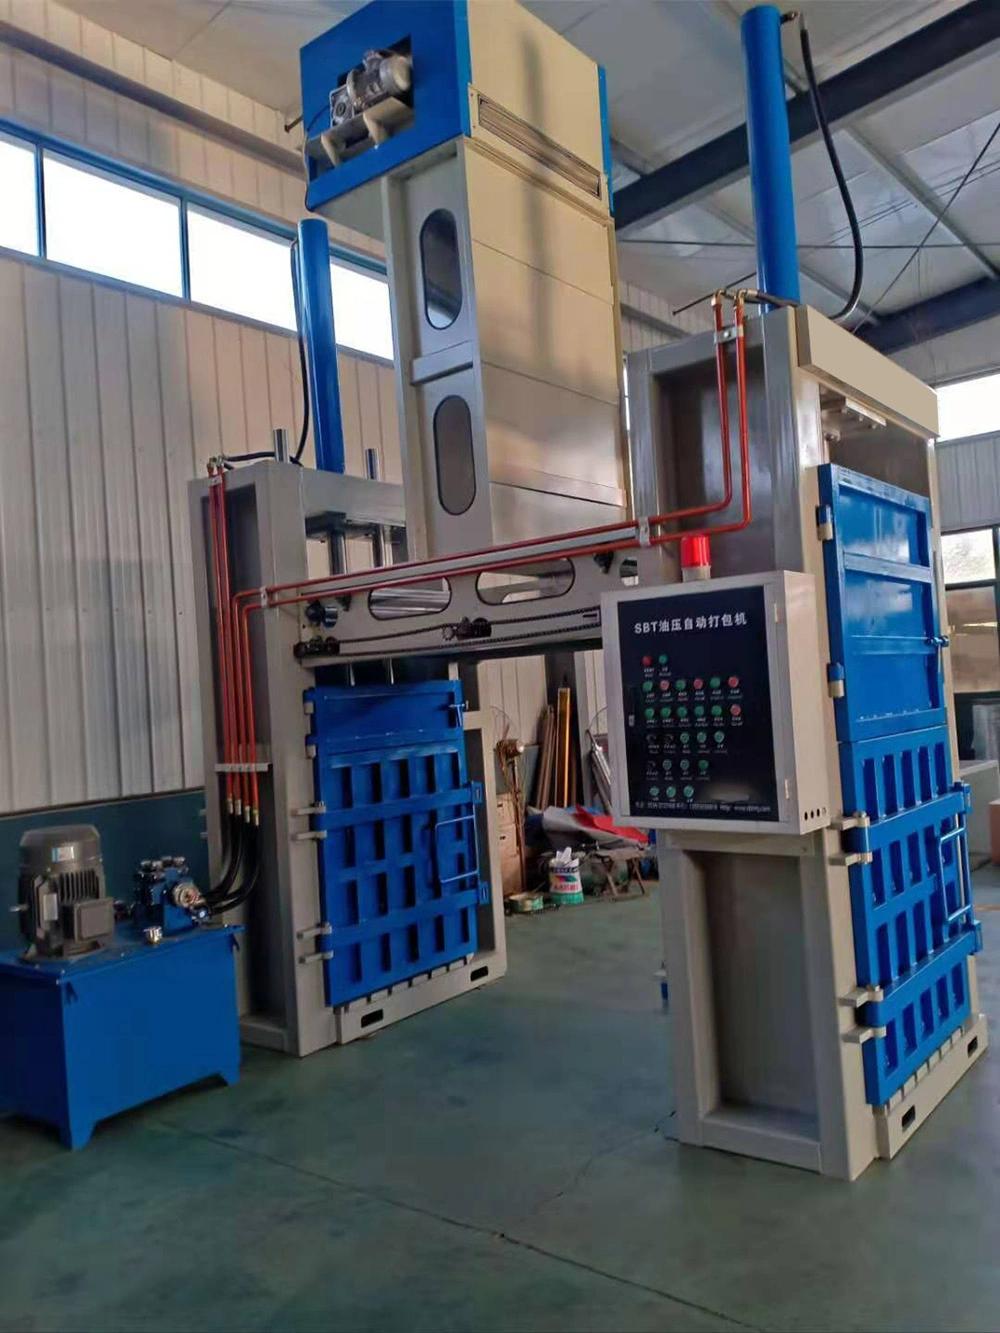 Waste Paper Automatic Packing Machine/Packing Machine Conveying System, Automatic Packing Machine for Waste Paper Boxes, Corrugated Boxes, Plastic Films, etc.